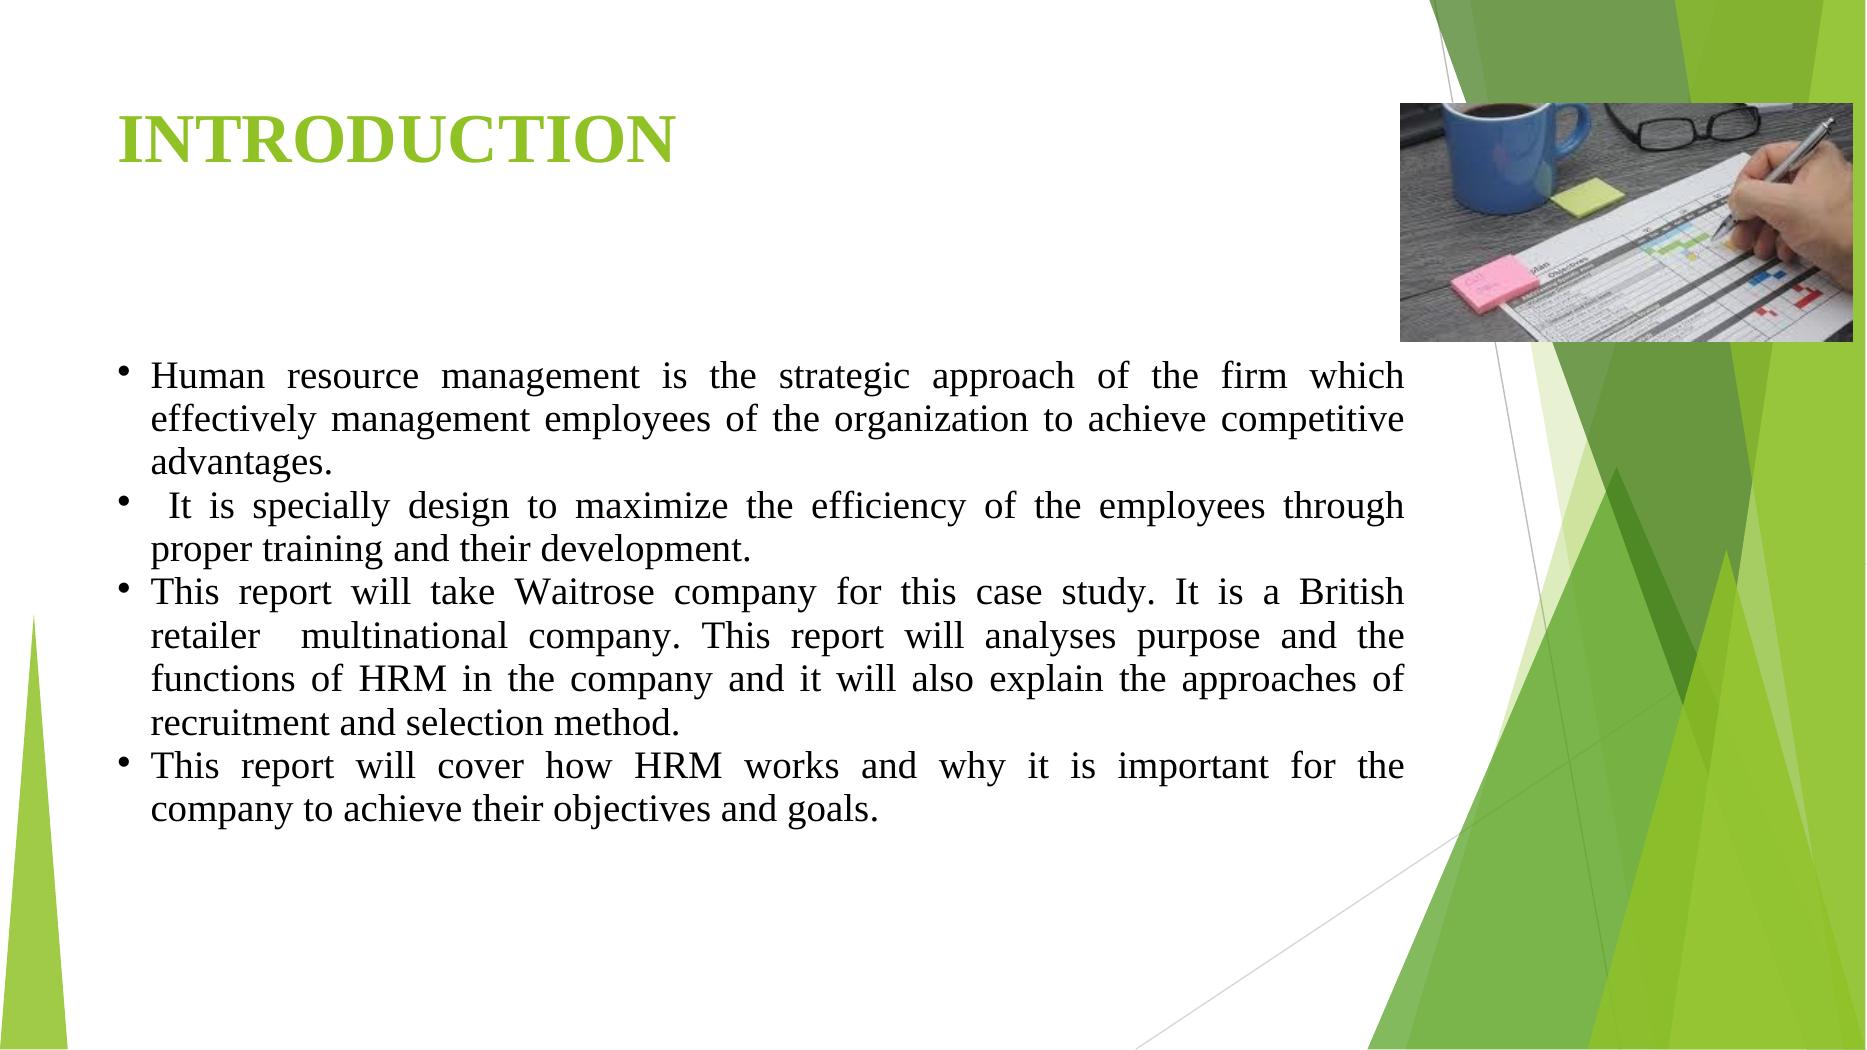 Importance of Human Resource Management in Achieving Competitive Advantages - A Case Study of Waitrose_2